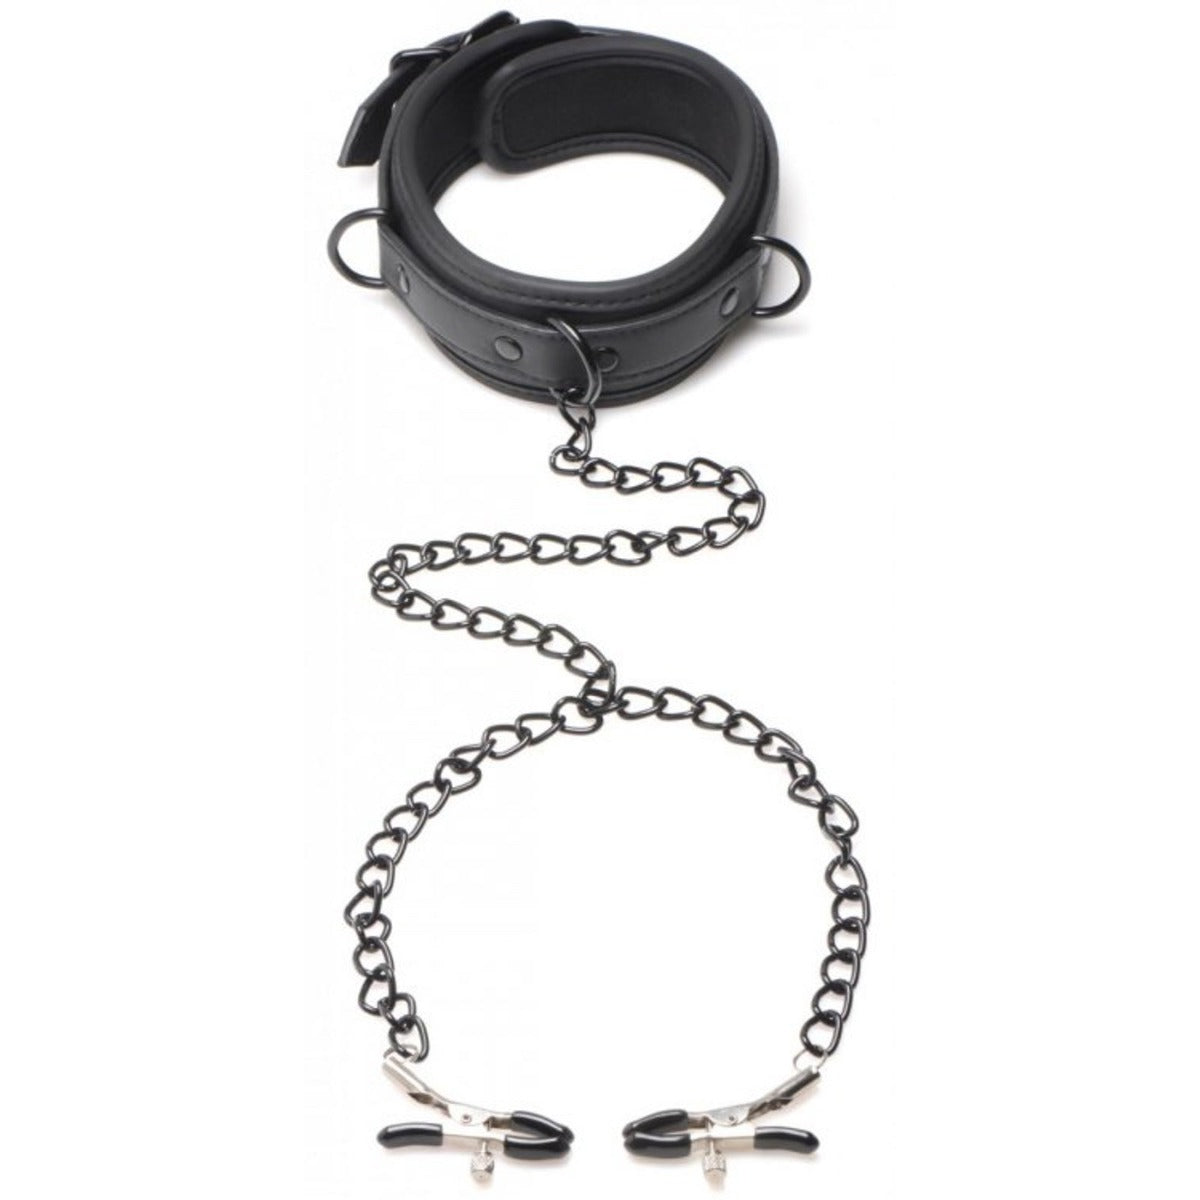 Master Series Collared Temptress Collar With Nipple Clamps Black